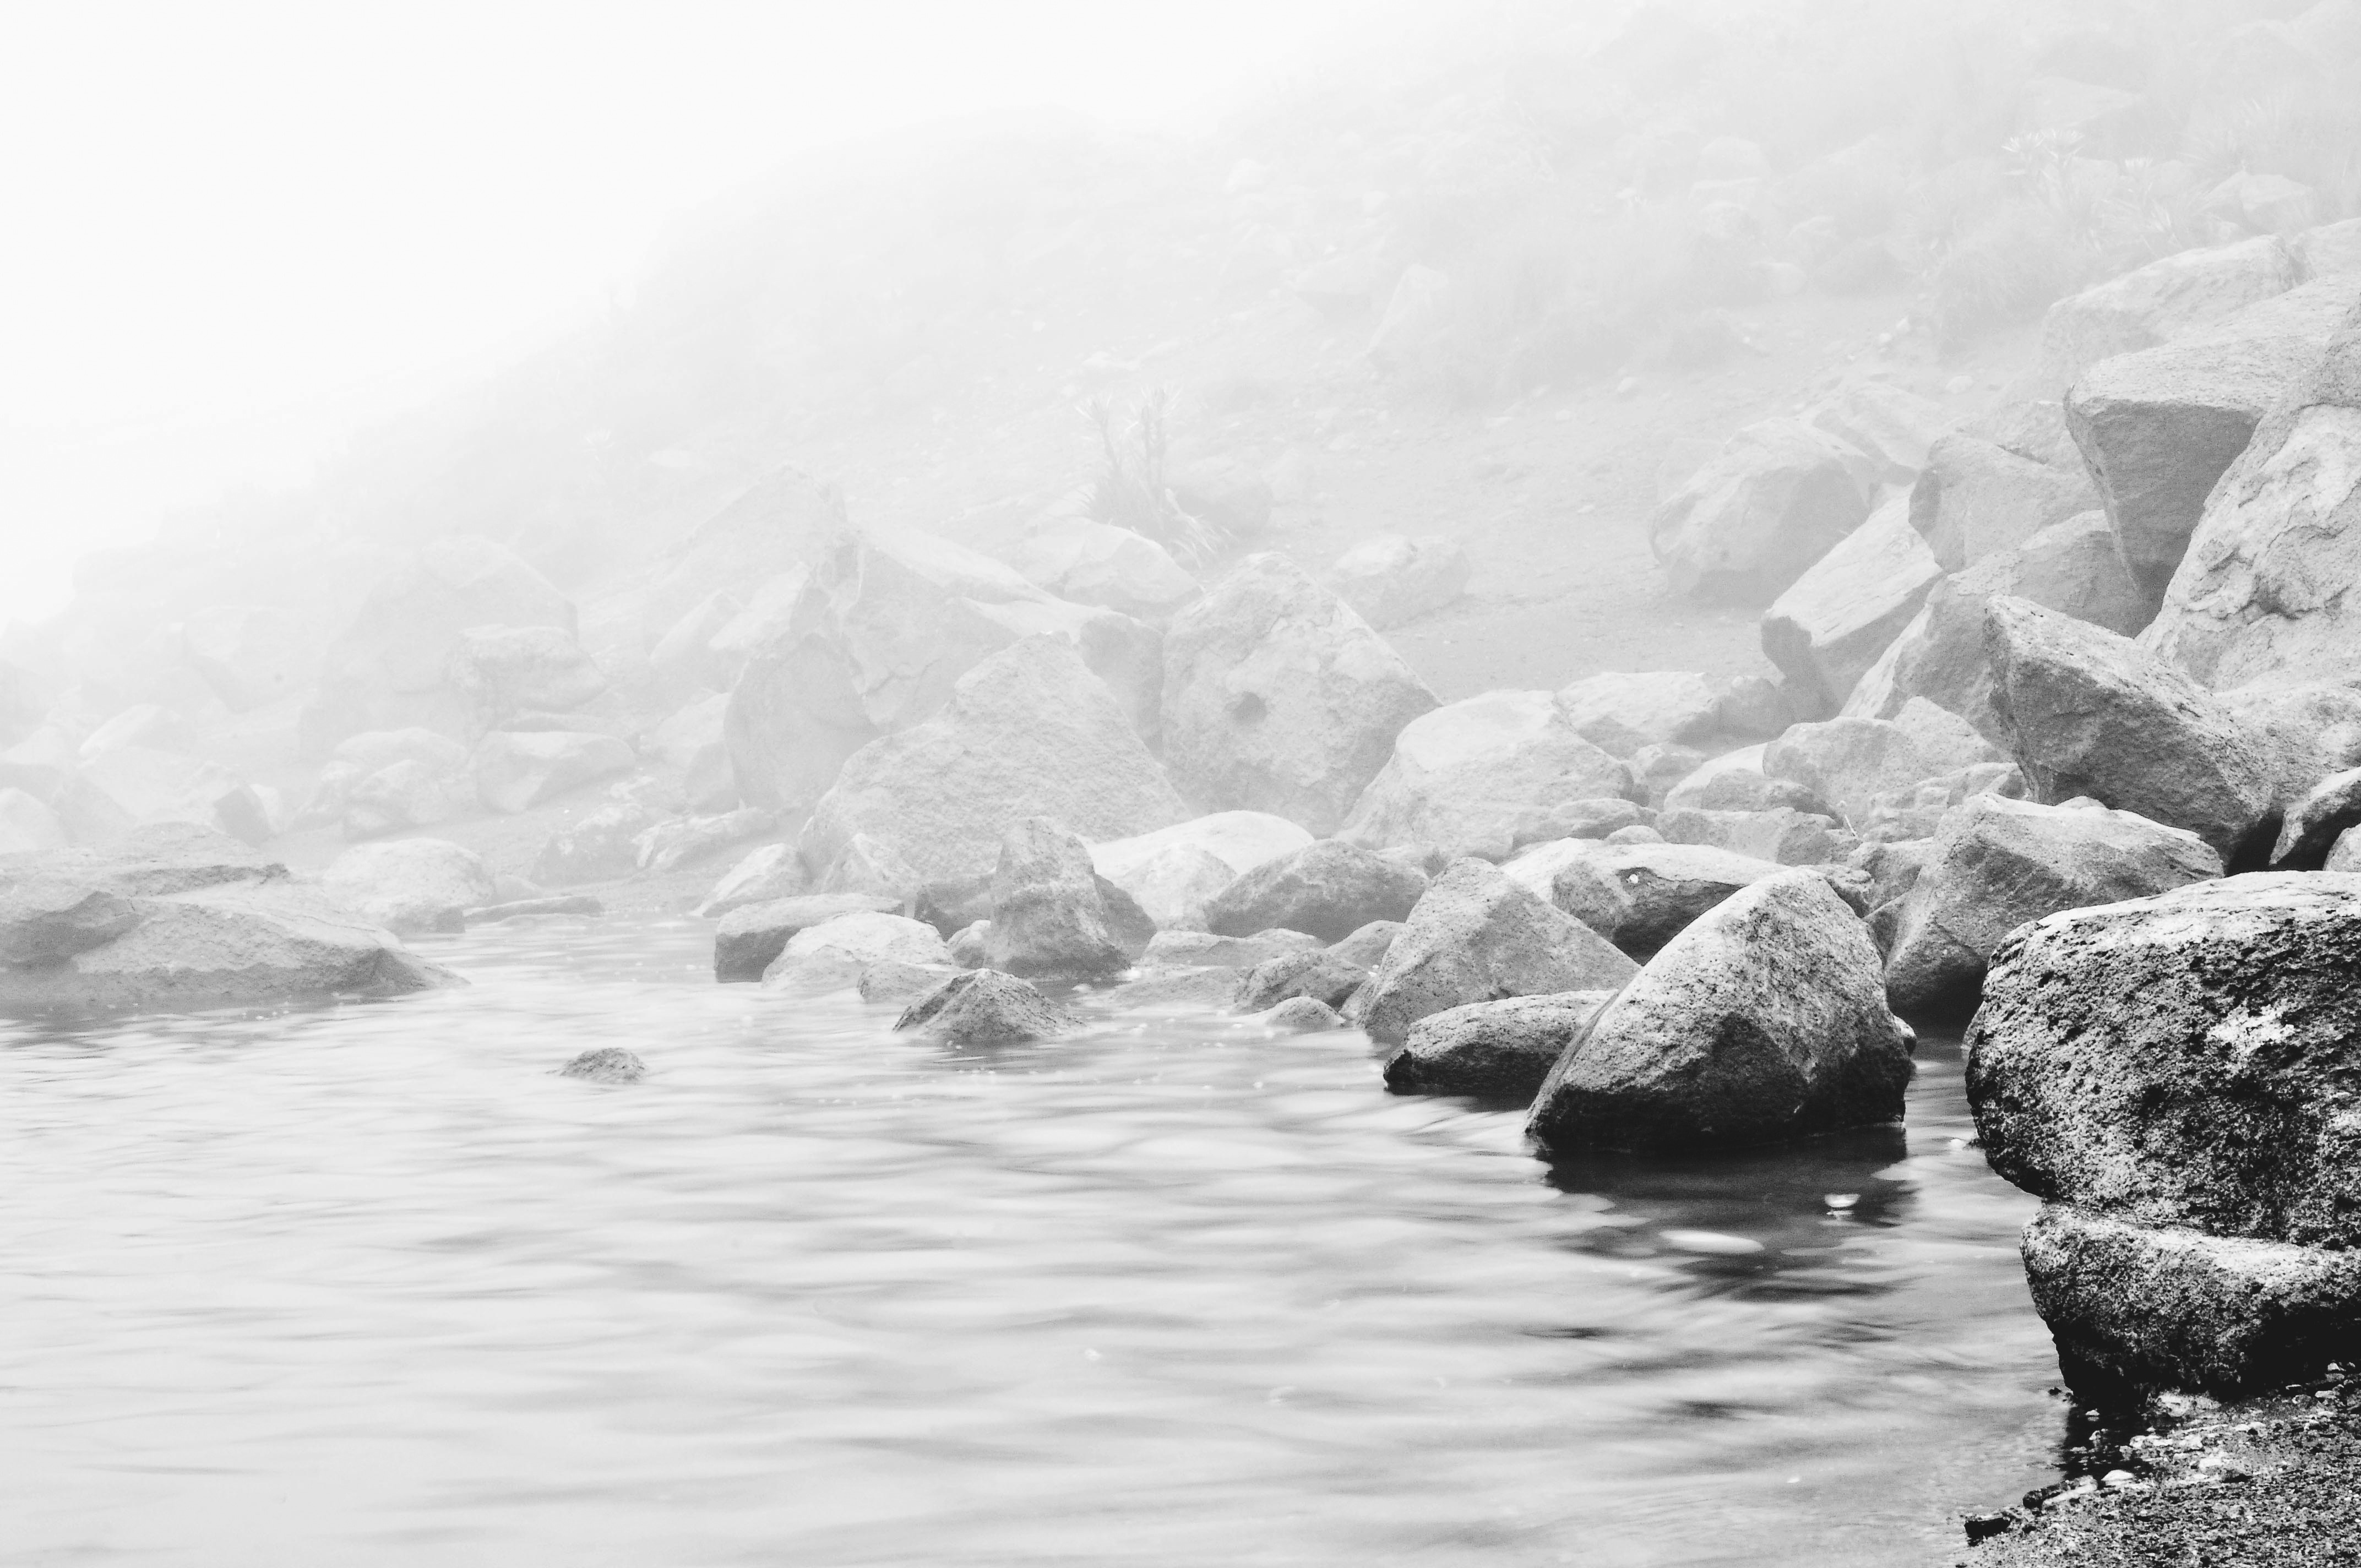 greyscale photo of rocks in body of water